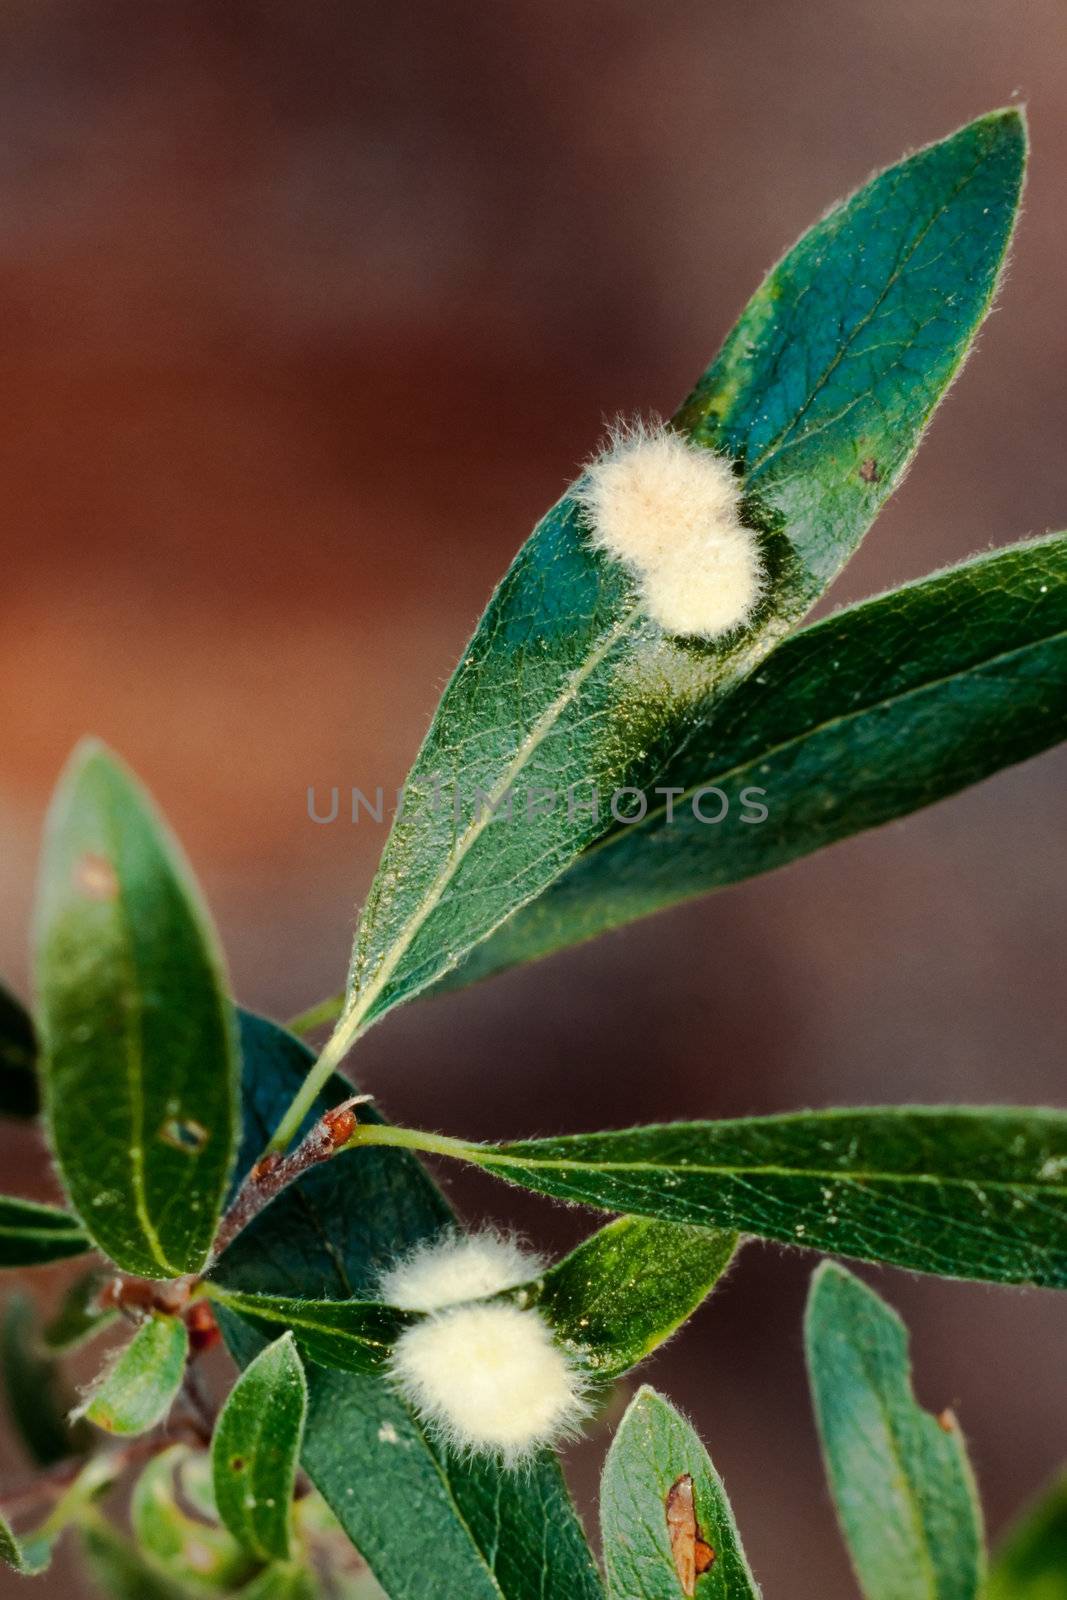 Furry galls on willow leaves by PiLens